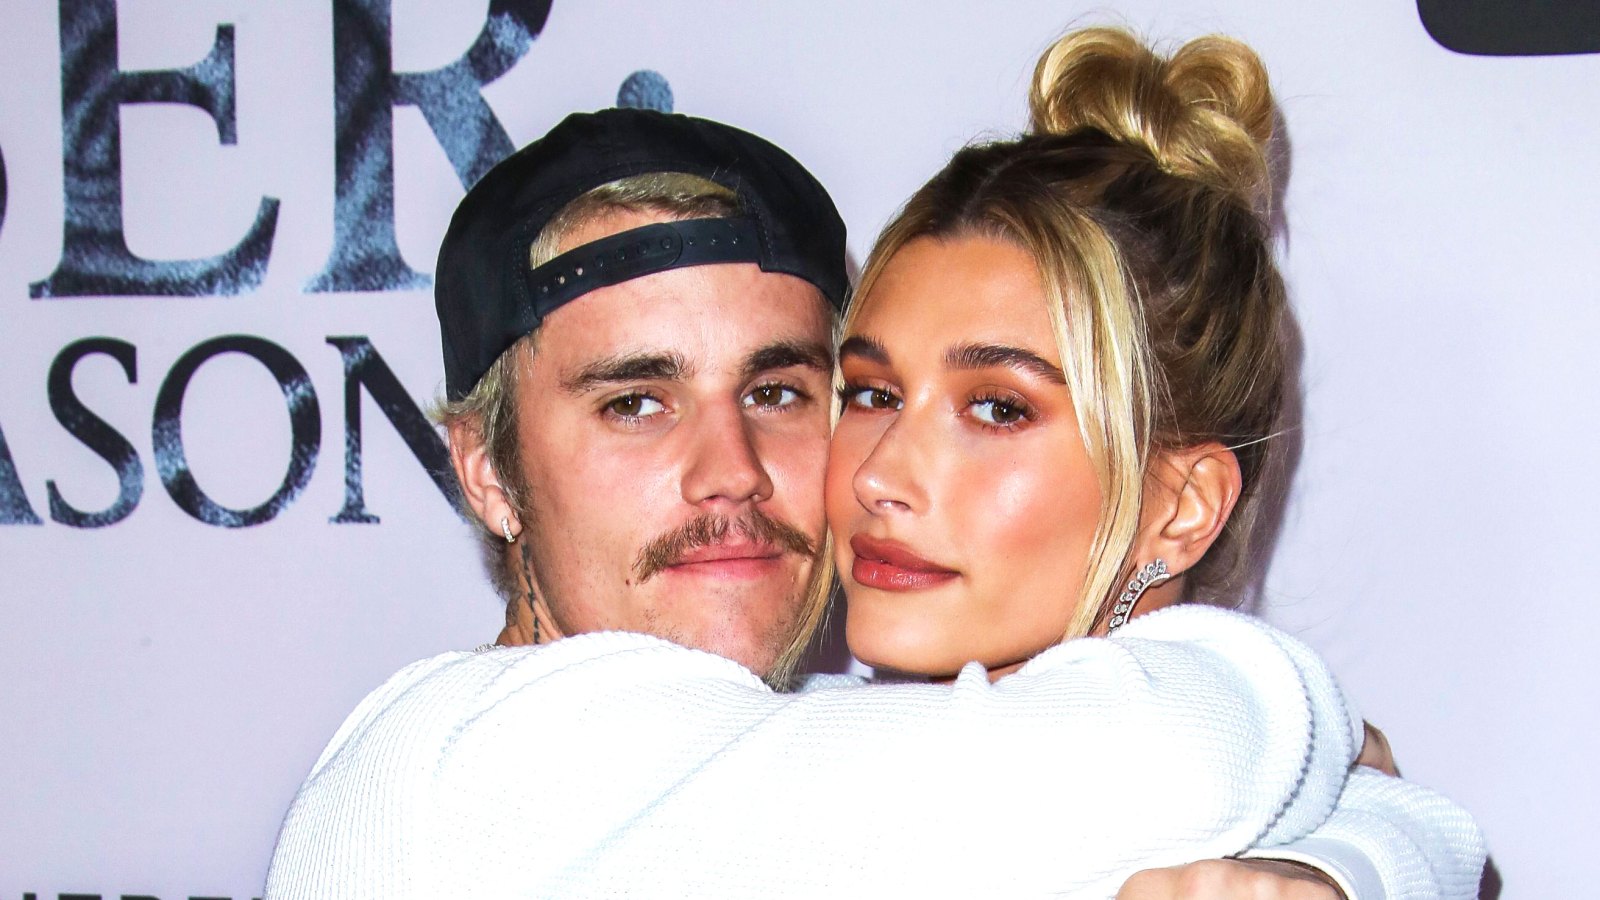 Hailey Baldwin Says Quarantining With Justin Bieber Has Made Her ‘Happier Than I Felt in Months’